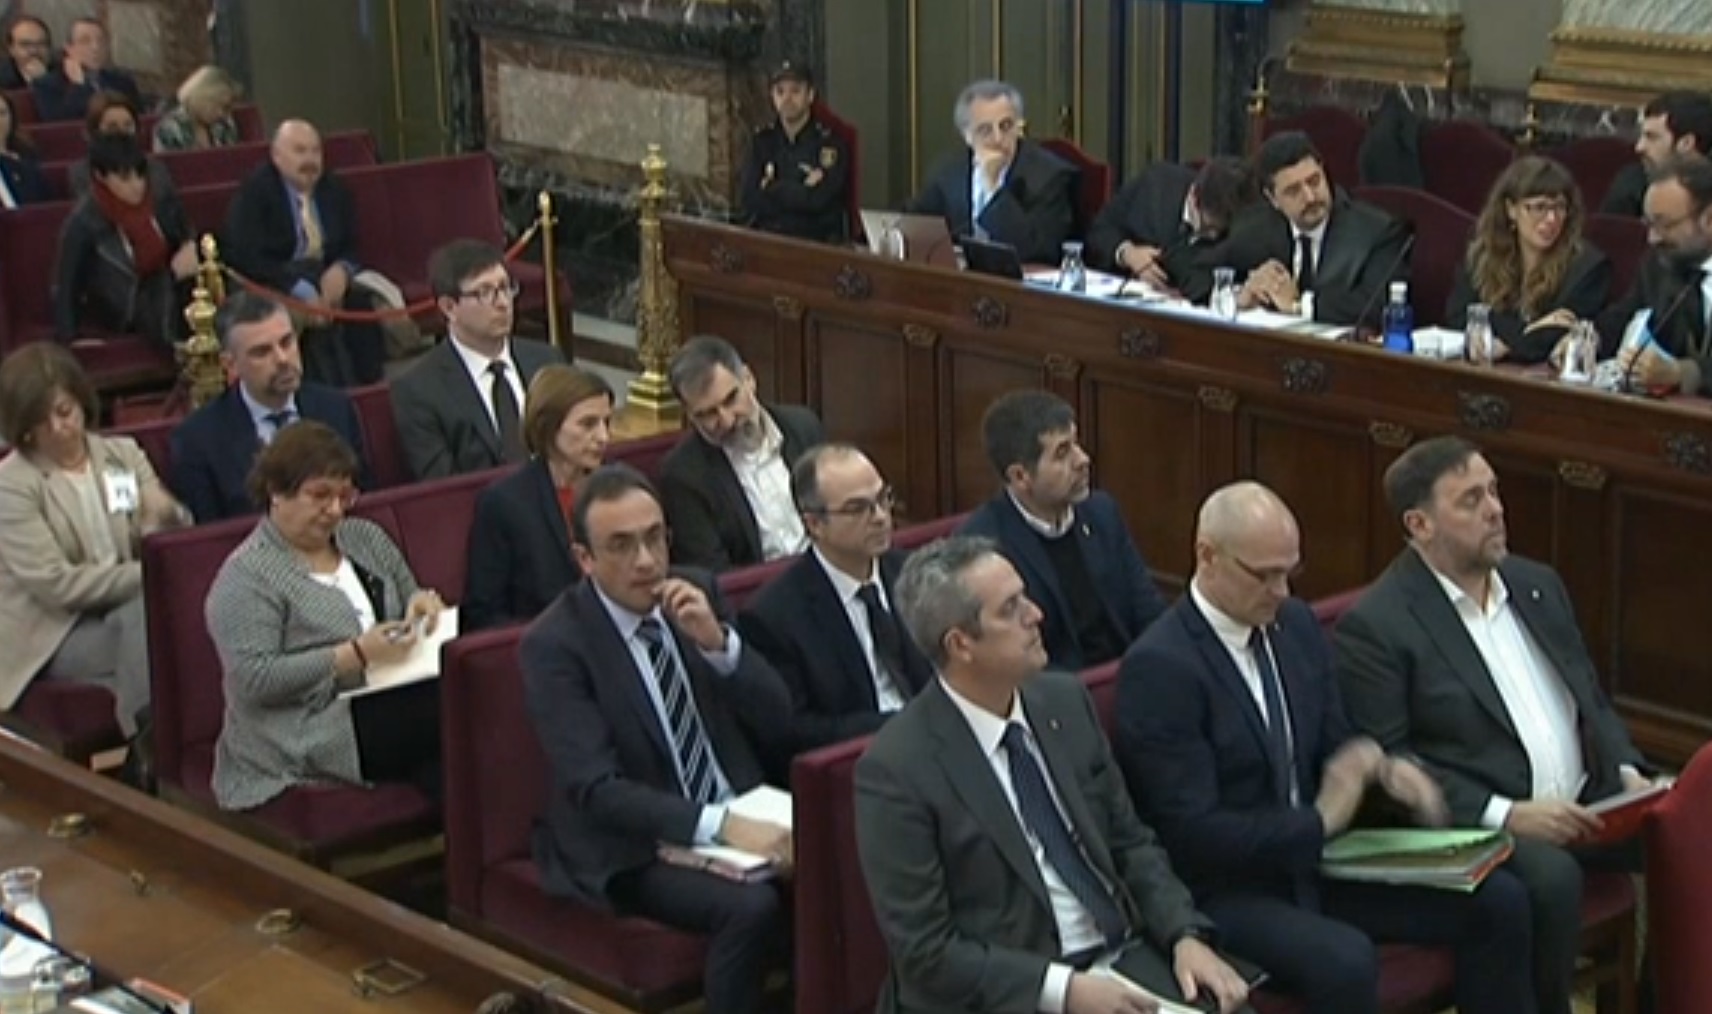 Jailed Catalan leaders in Spain's Supreme Court